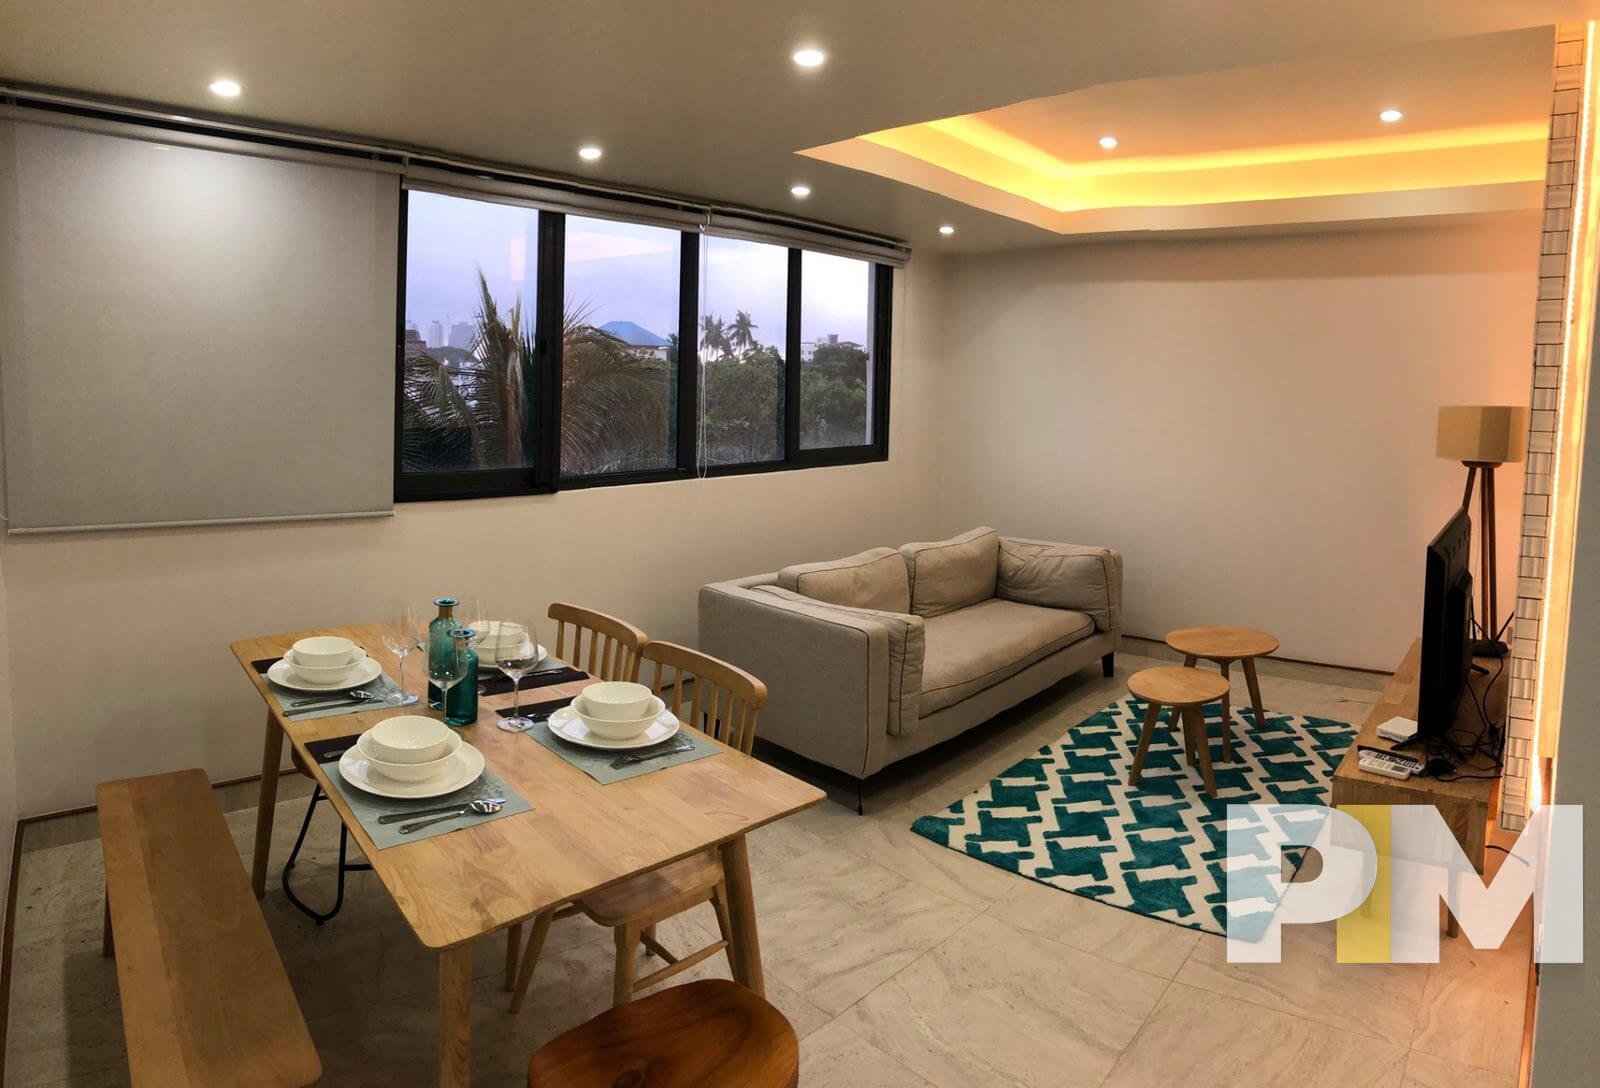 living room with dining table and chairs - Yangon Property